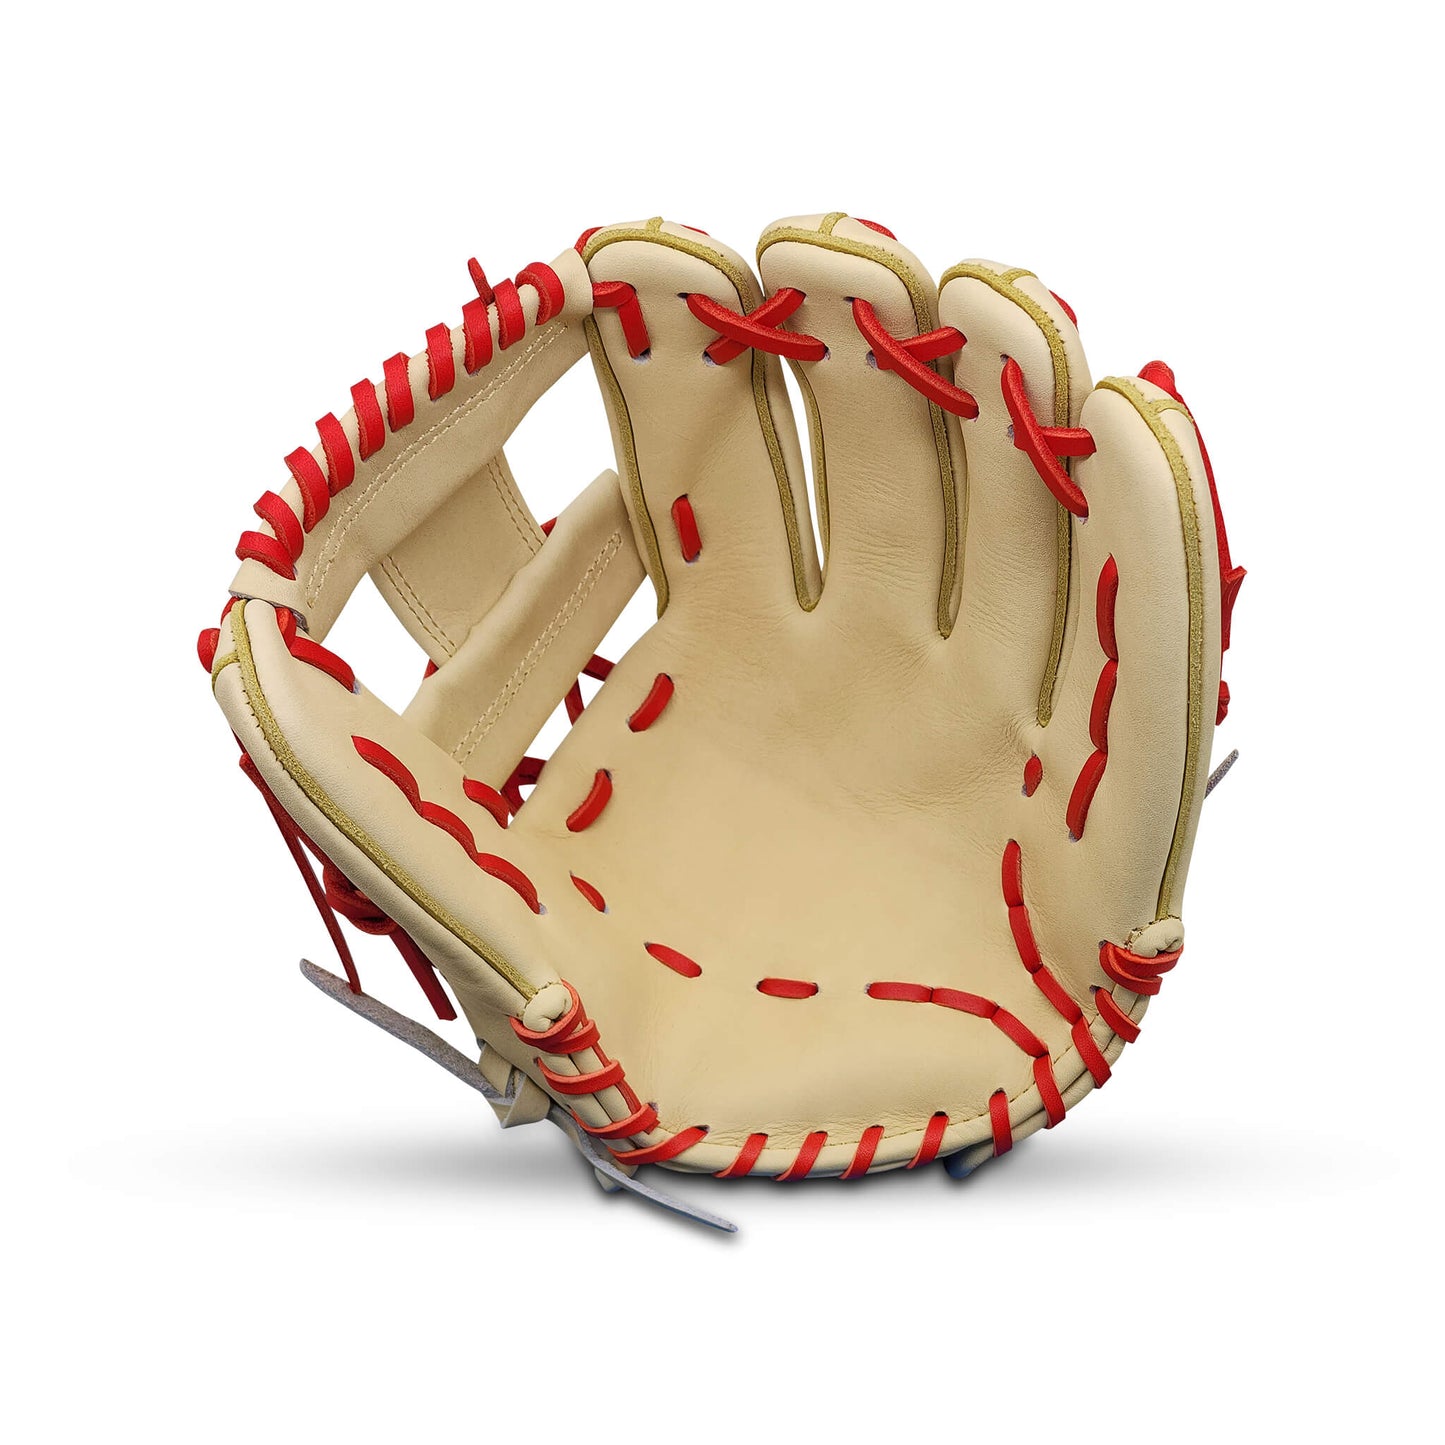 Titan Series Limited Edition 11.50” Infield Glove with I-Web, Camel Shell and Palm, Red Lacing, and Embroidered Texas Flag – RHT